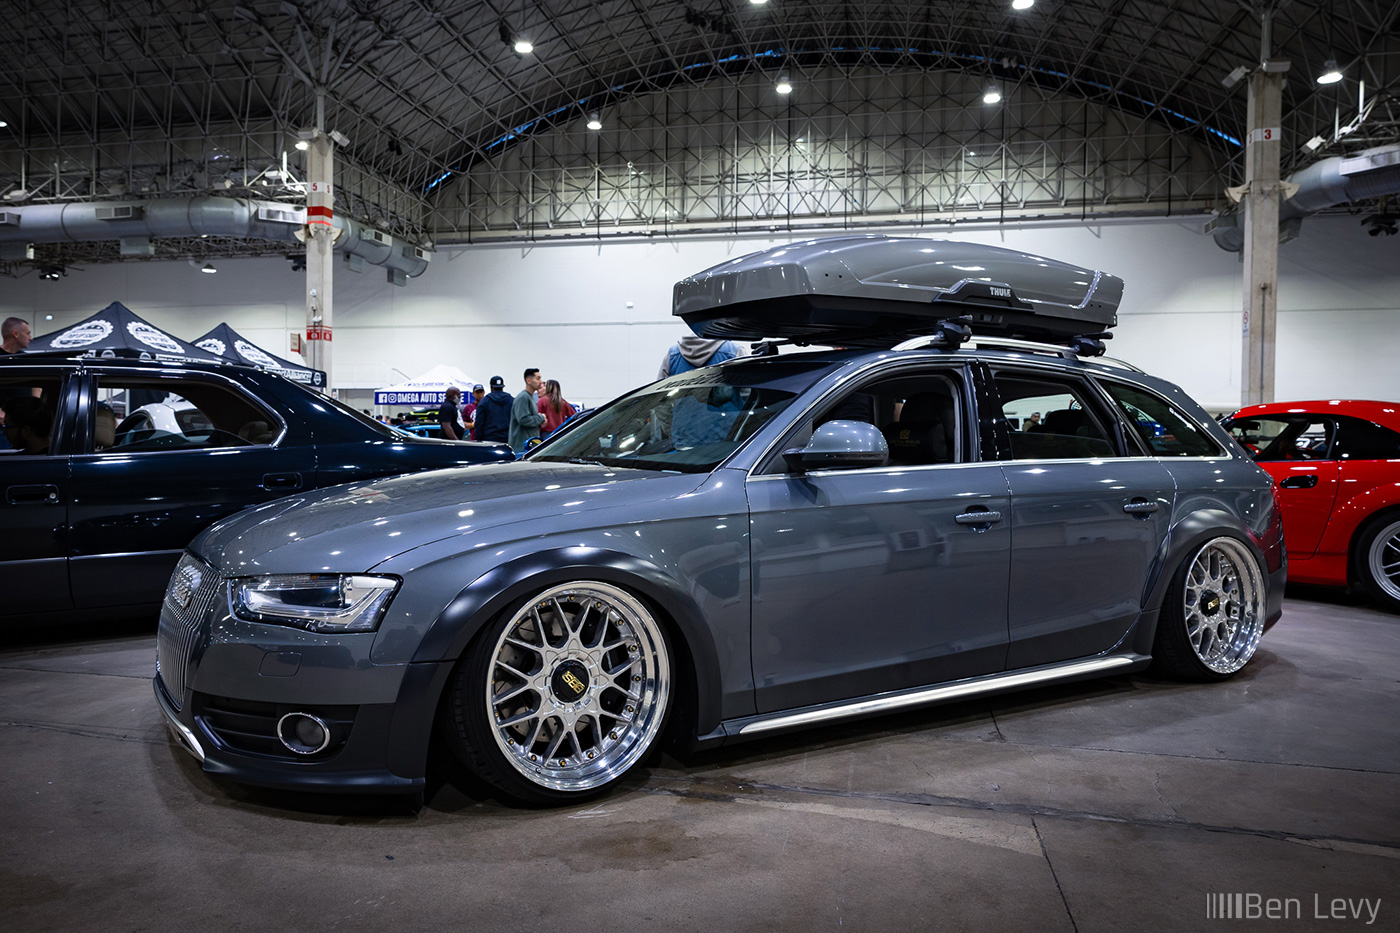 Bagged, Grey Audi Allroad at Wekfest Chicago